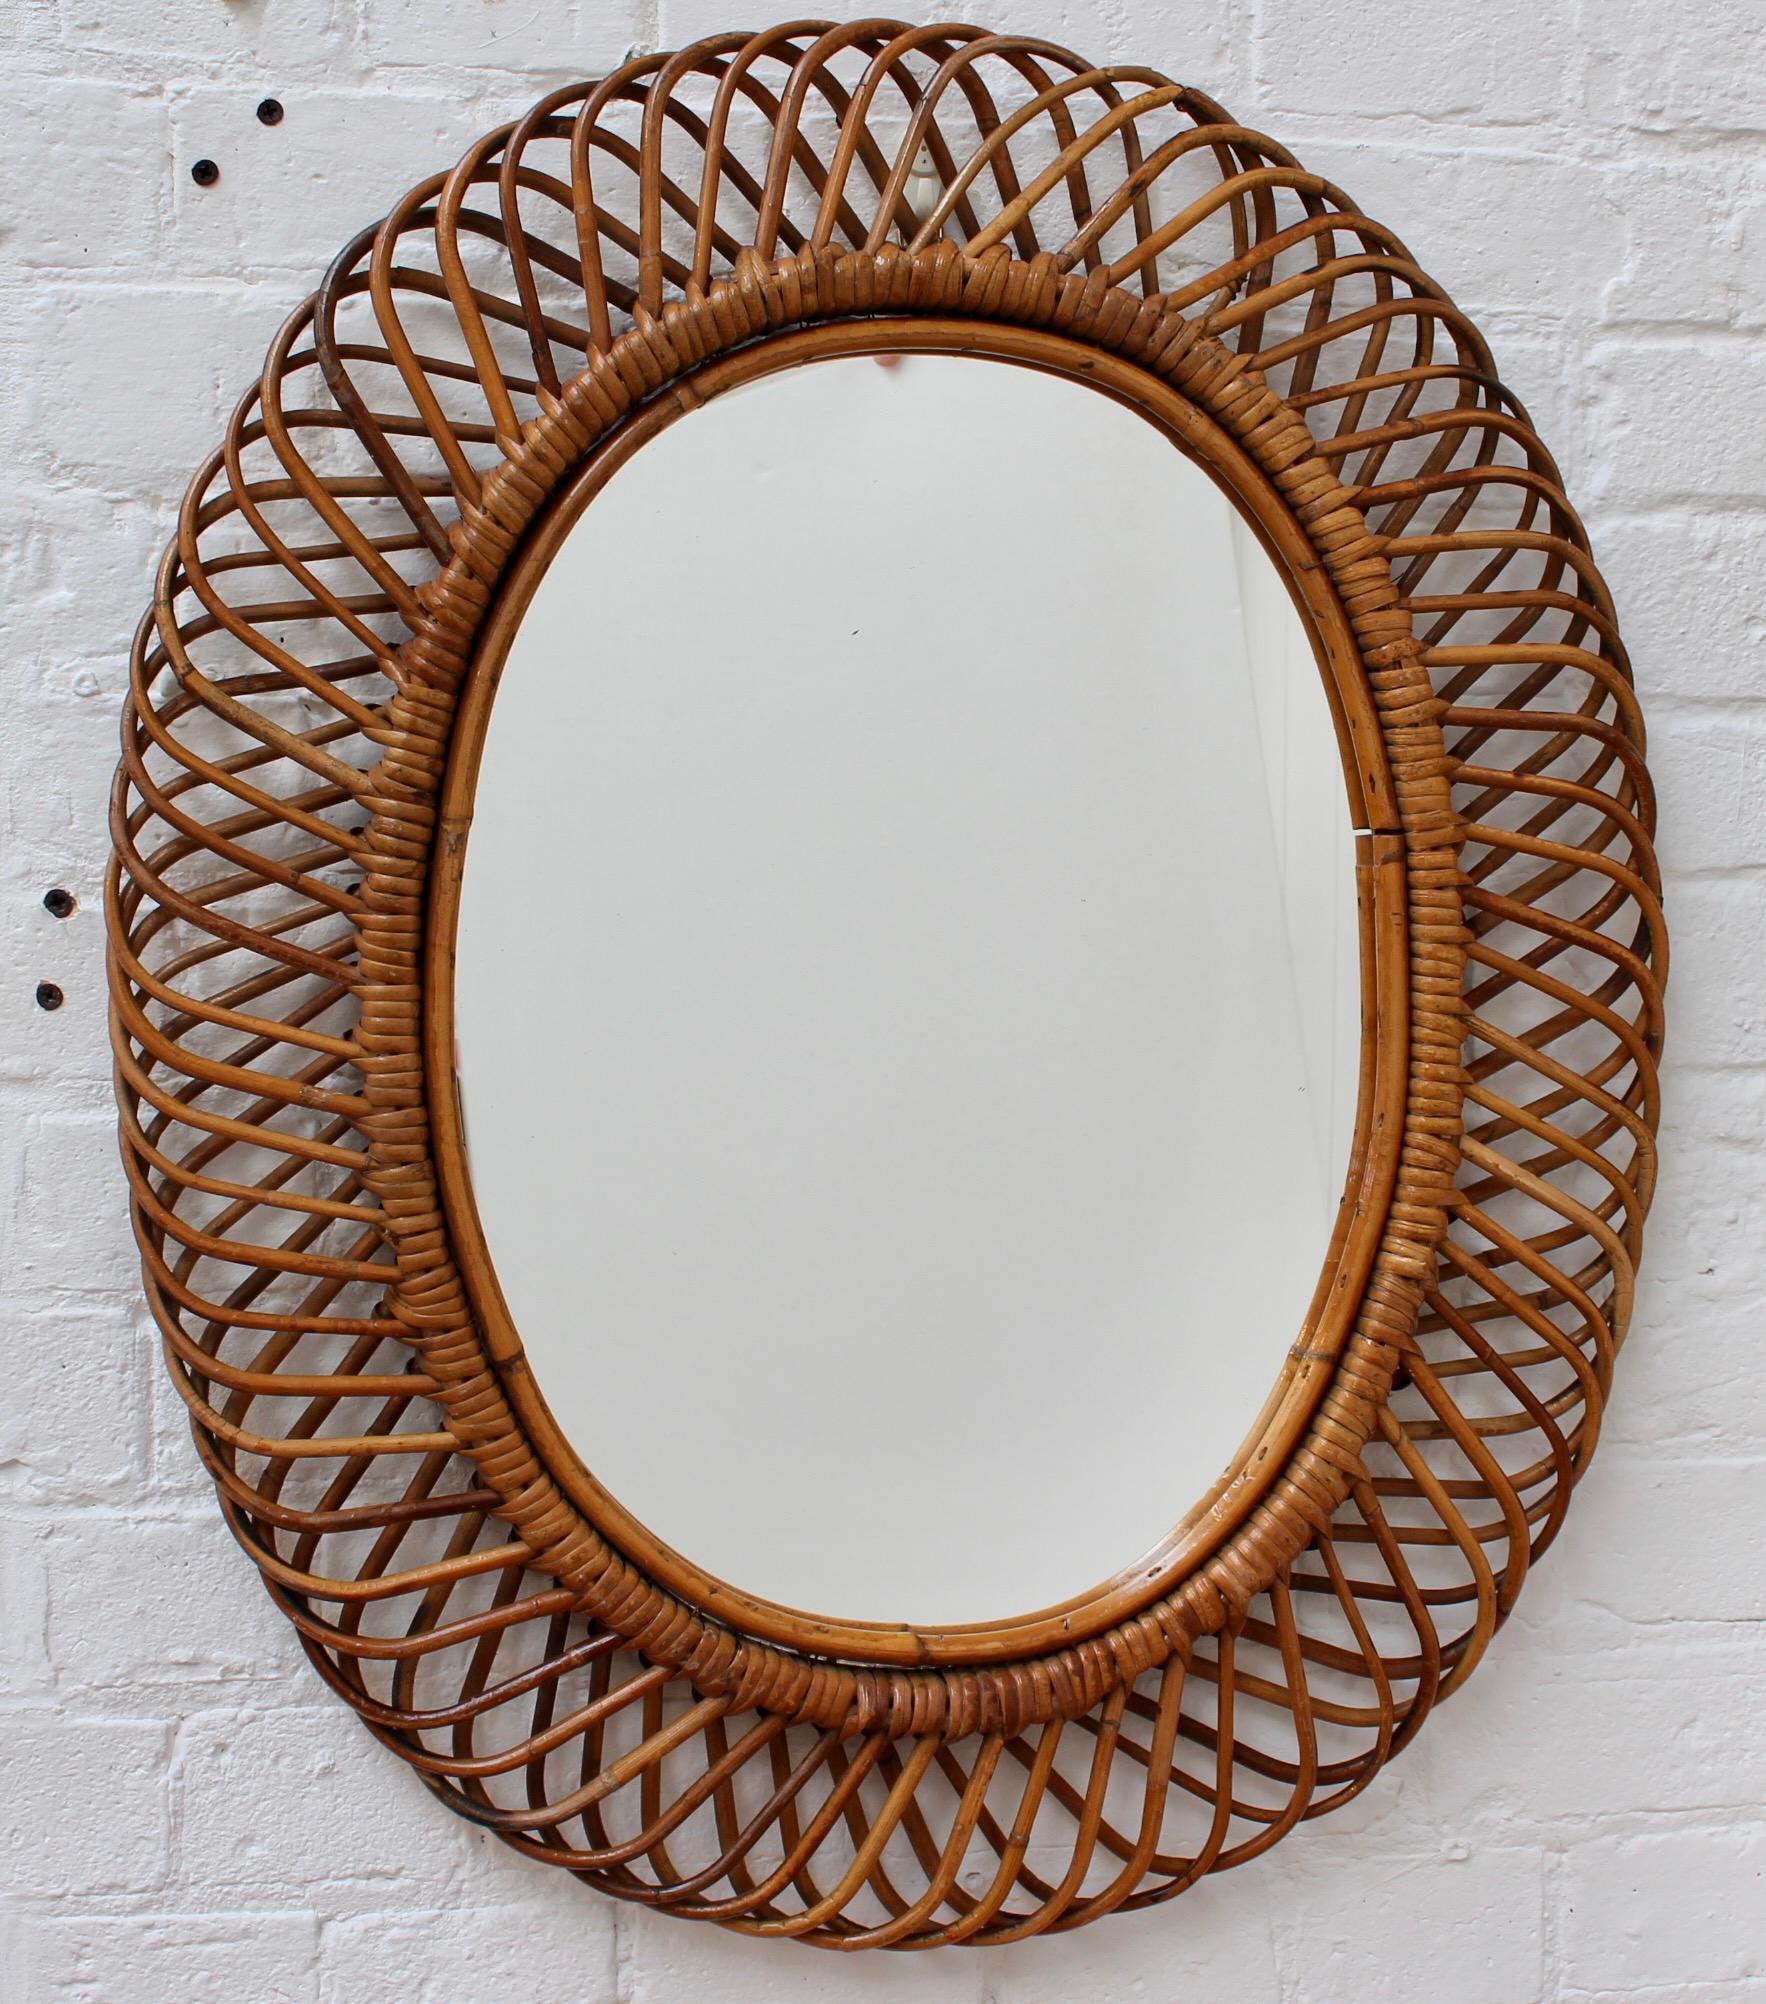 Vintage Italian oval rattan wall mirror (circa 1960s). This mirror has a complex weave of rattan in a series of horseshoe-shaped projections on the frame edge. There is a graceful, aged patina on the mirror frame and the rattan wrap-around ties have